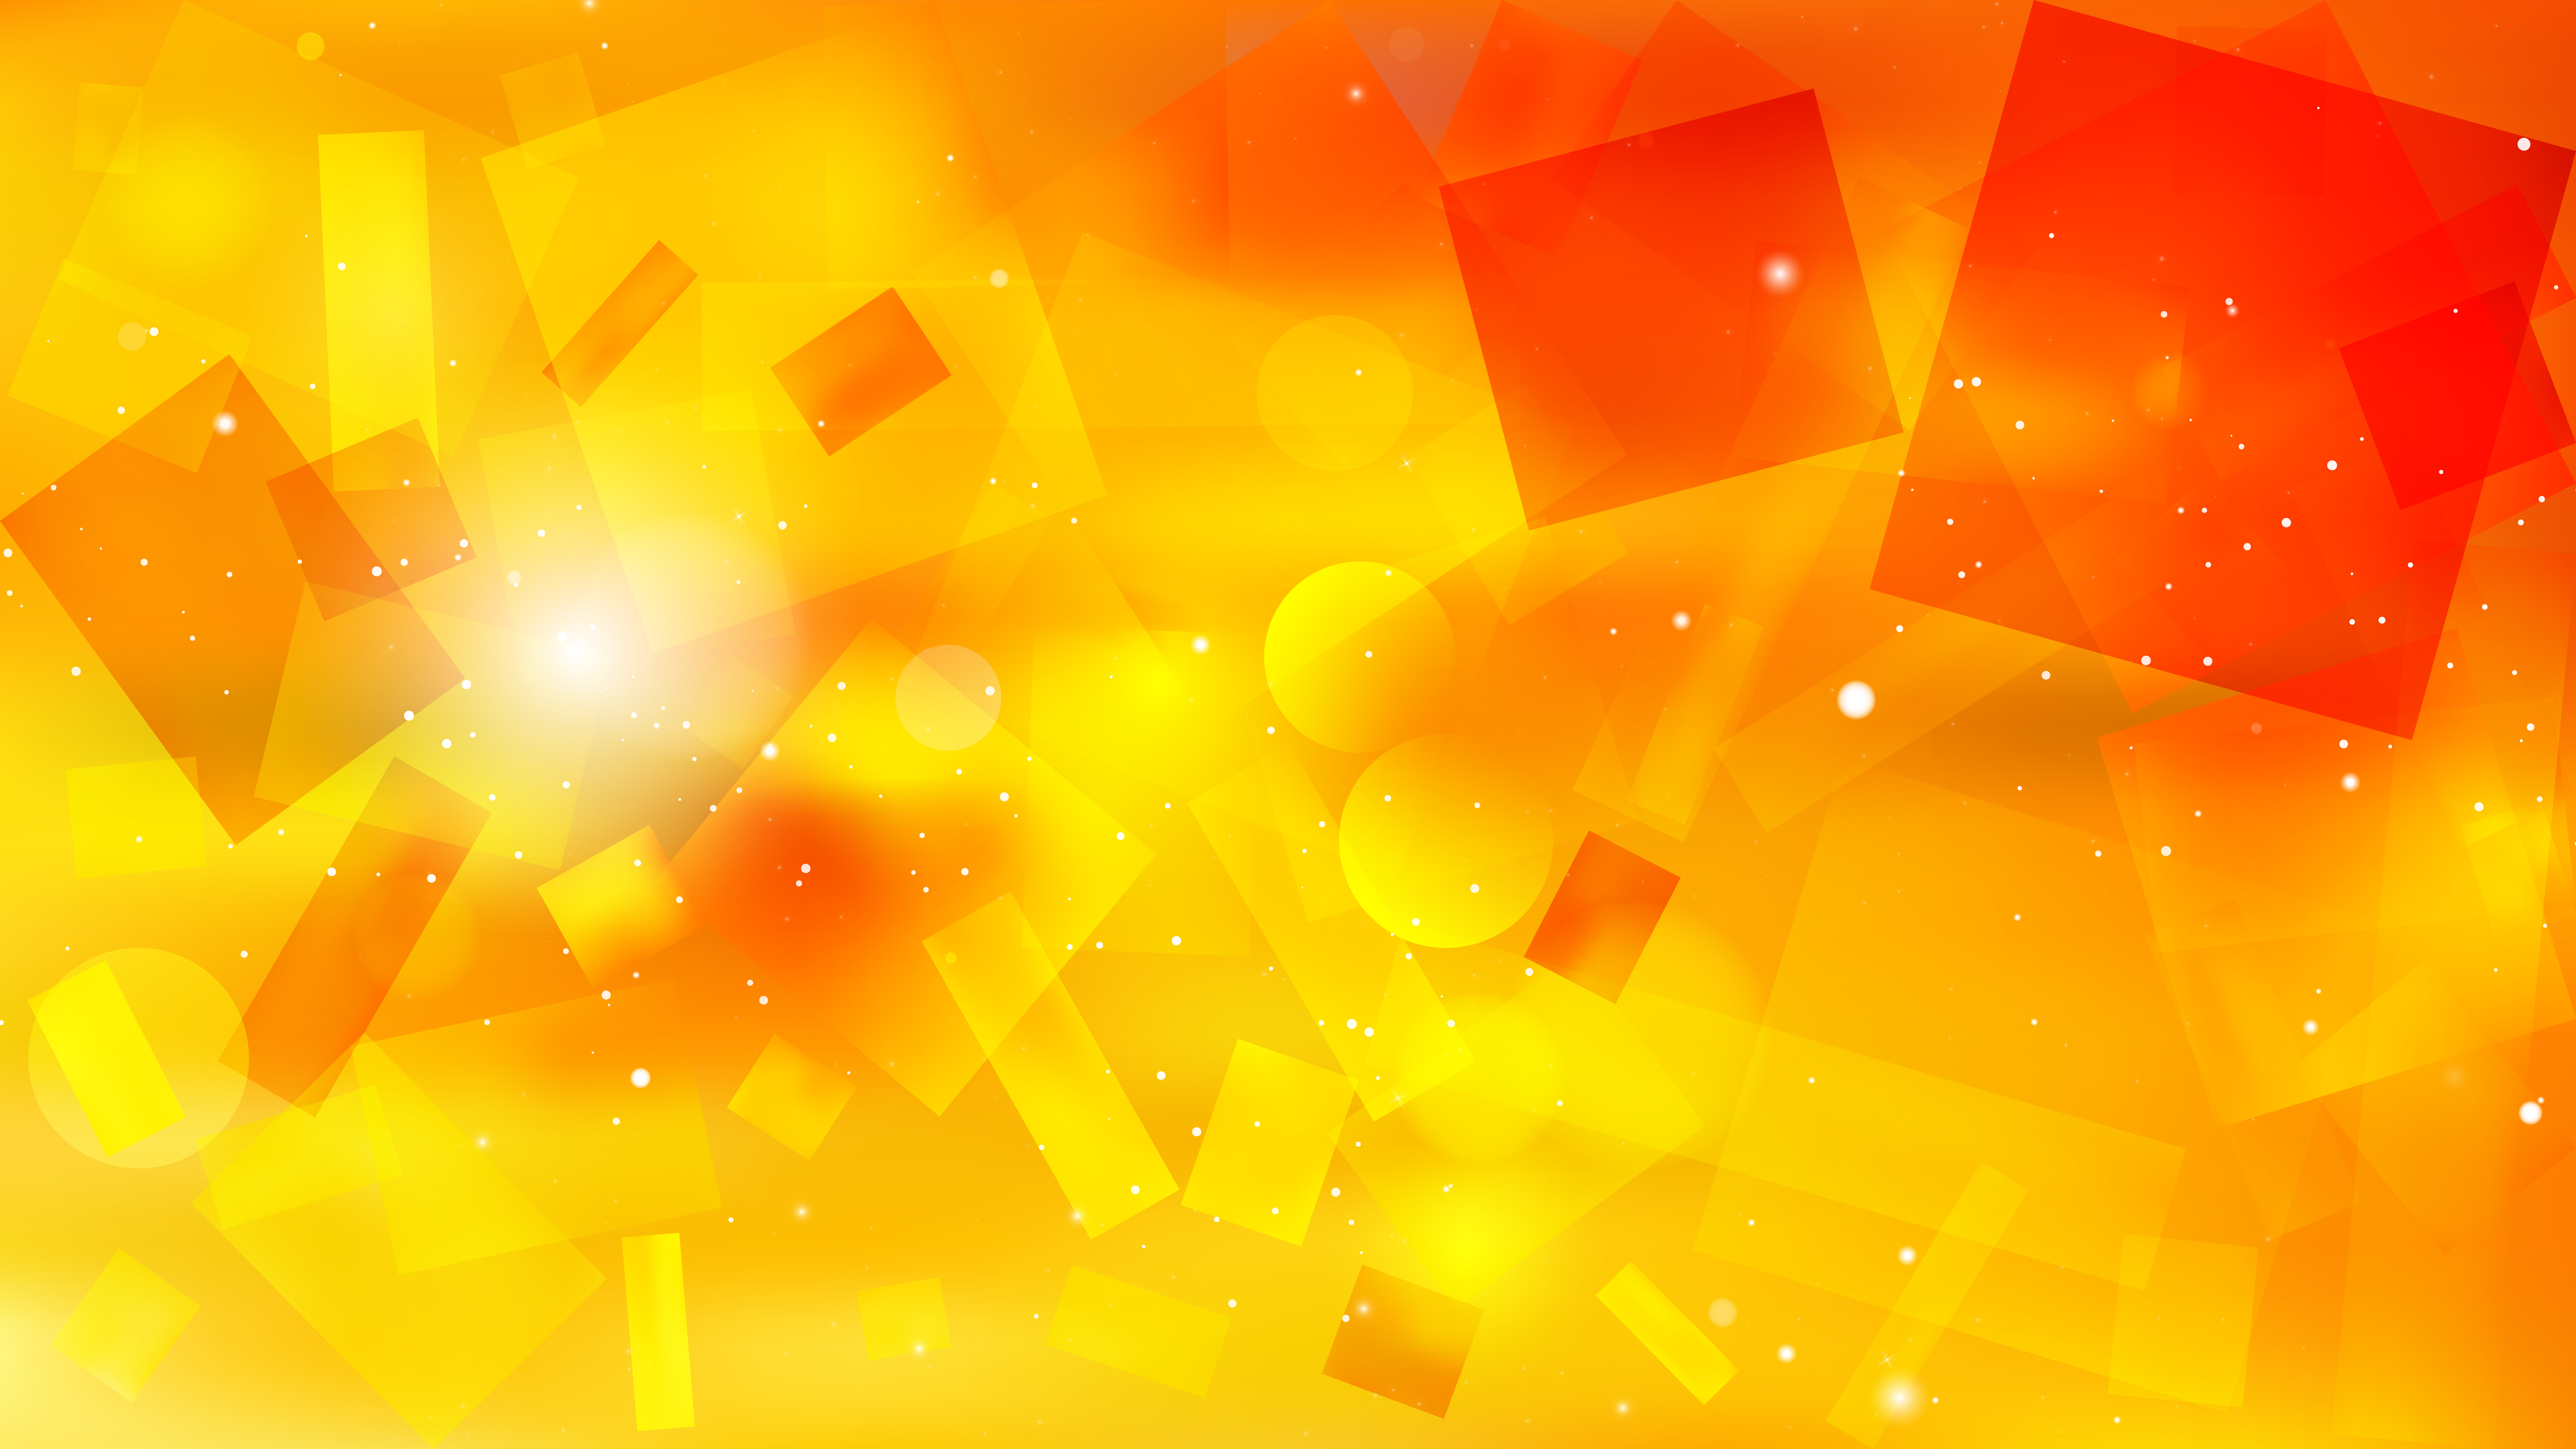 Free Orange and Yellow Abstract Background Design